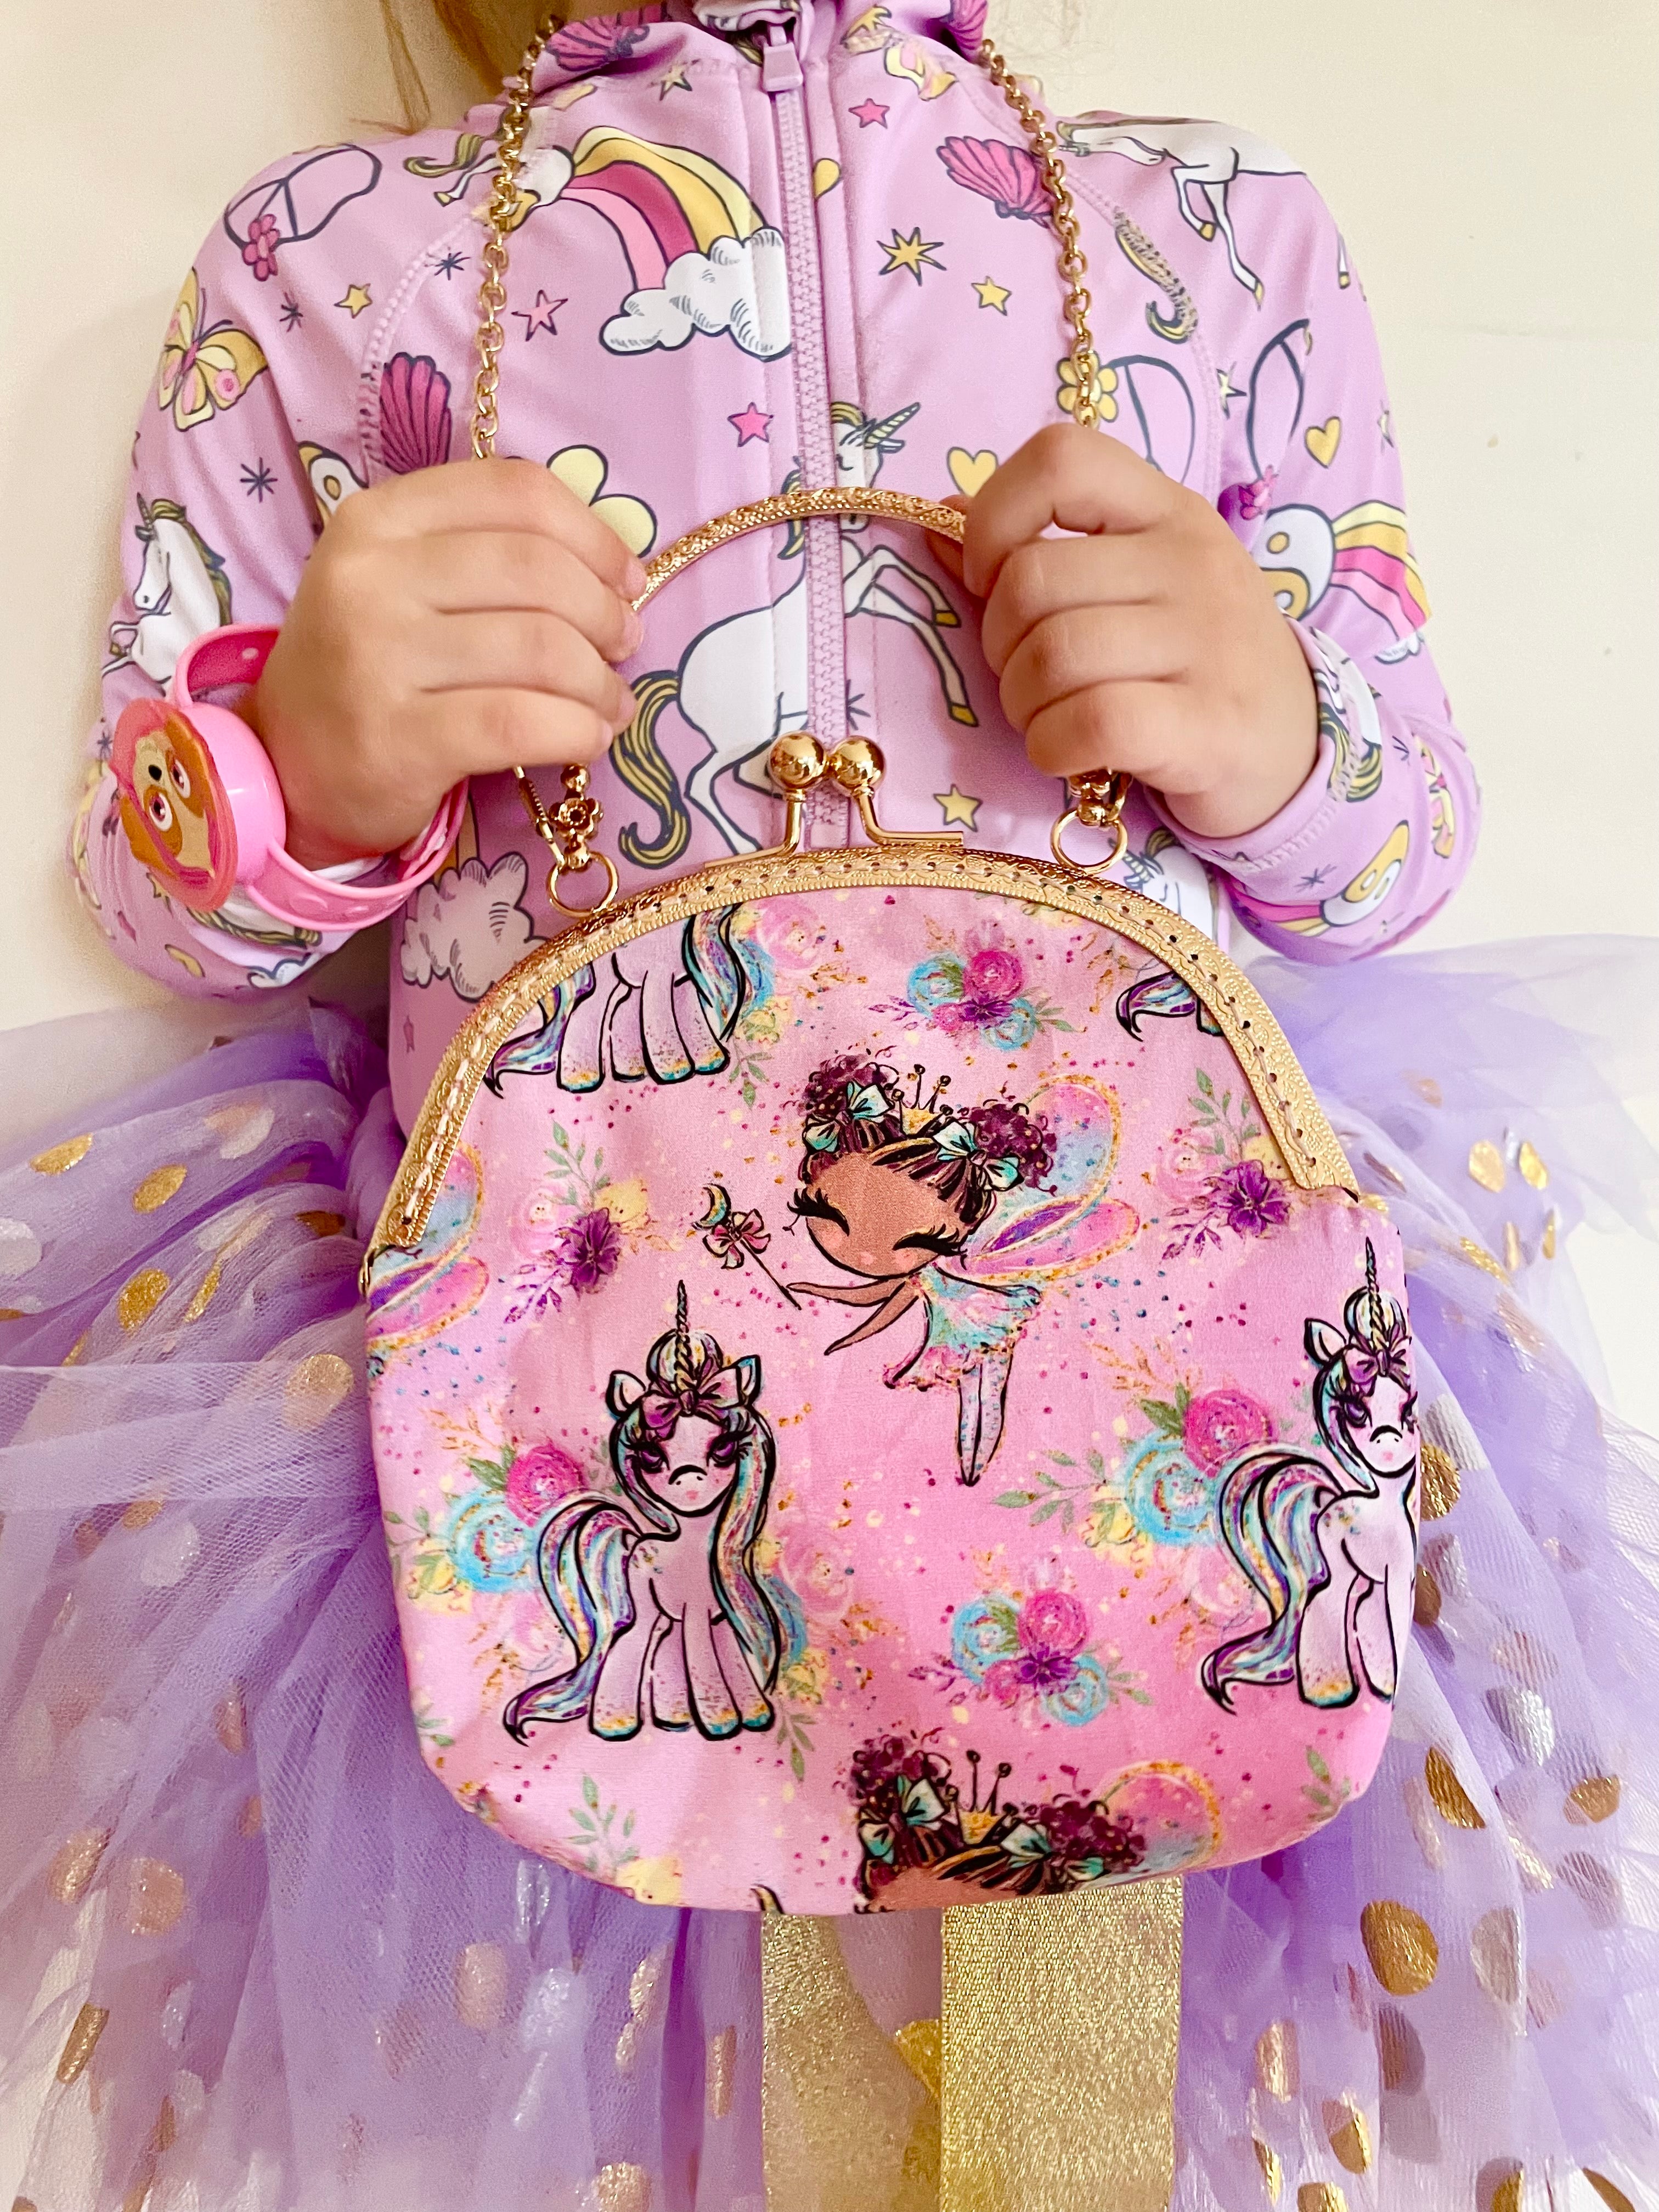 Sprinkles Toyz Pretend Play Makeup Kit for Little Girls with Unicorn Purse  : Fake (Not Real) Make